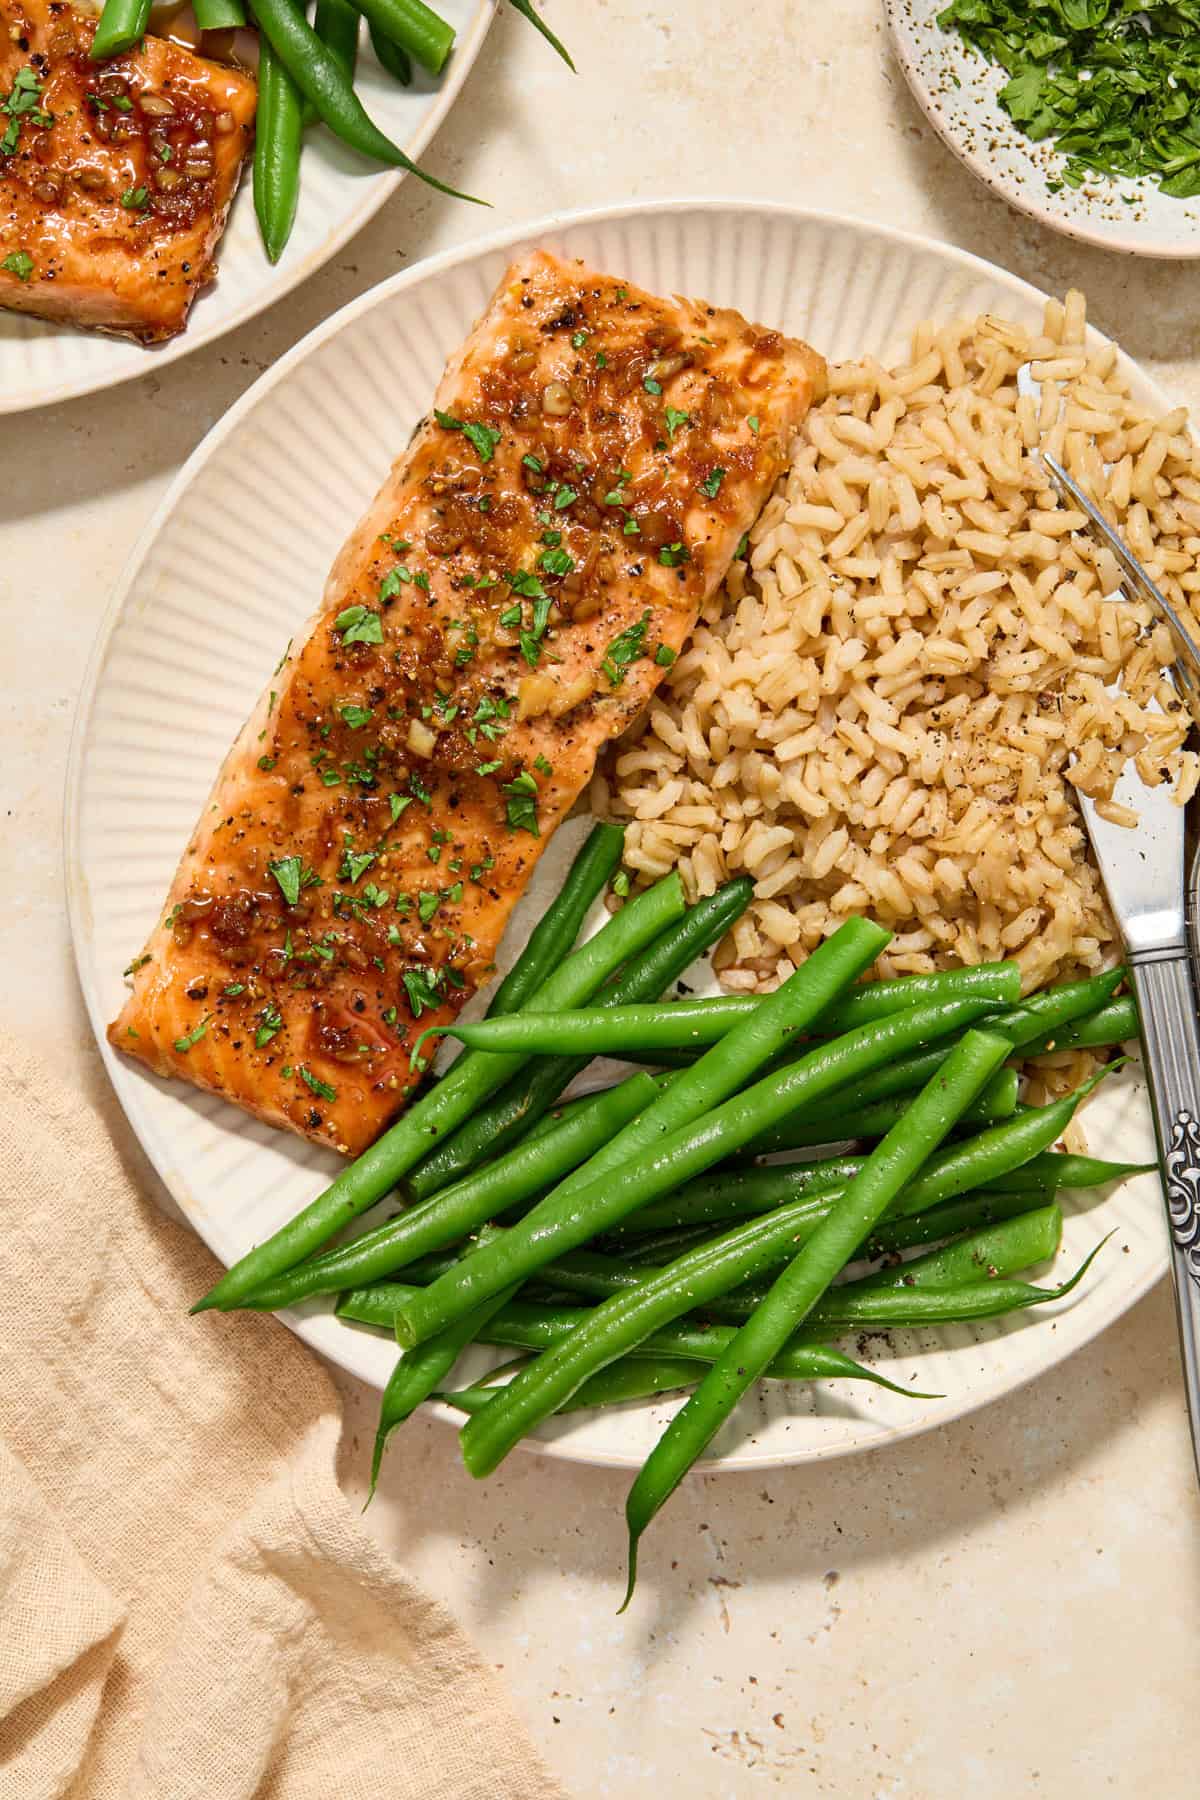 Citrus glazed salmon filet on plate with green beans and brown rice.